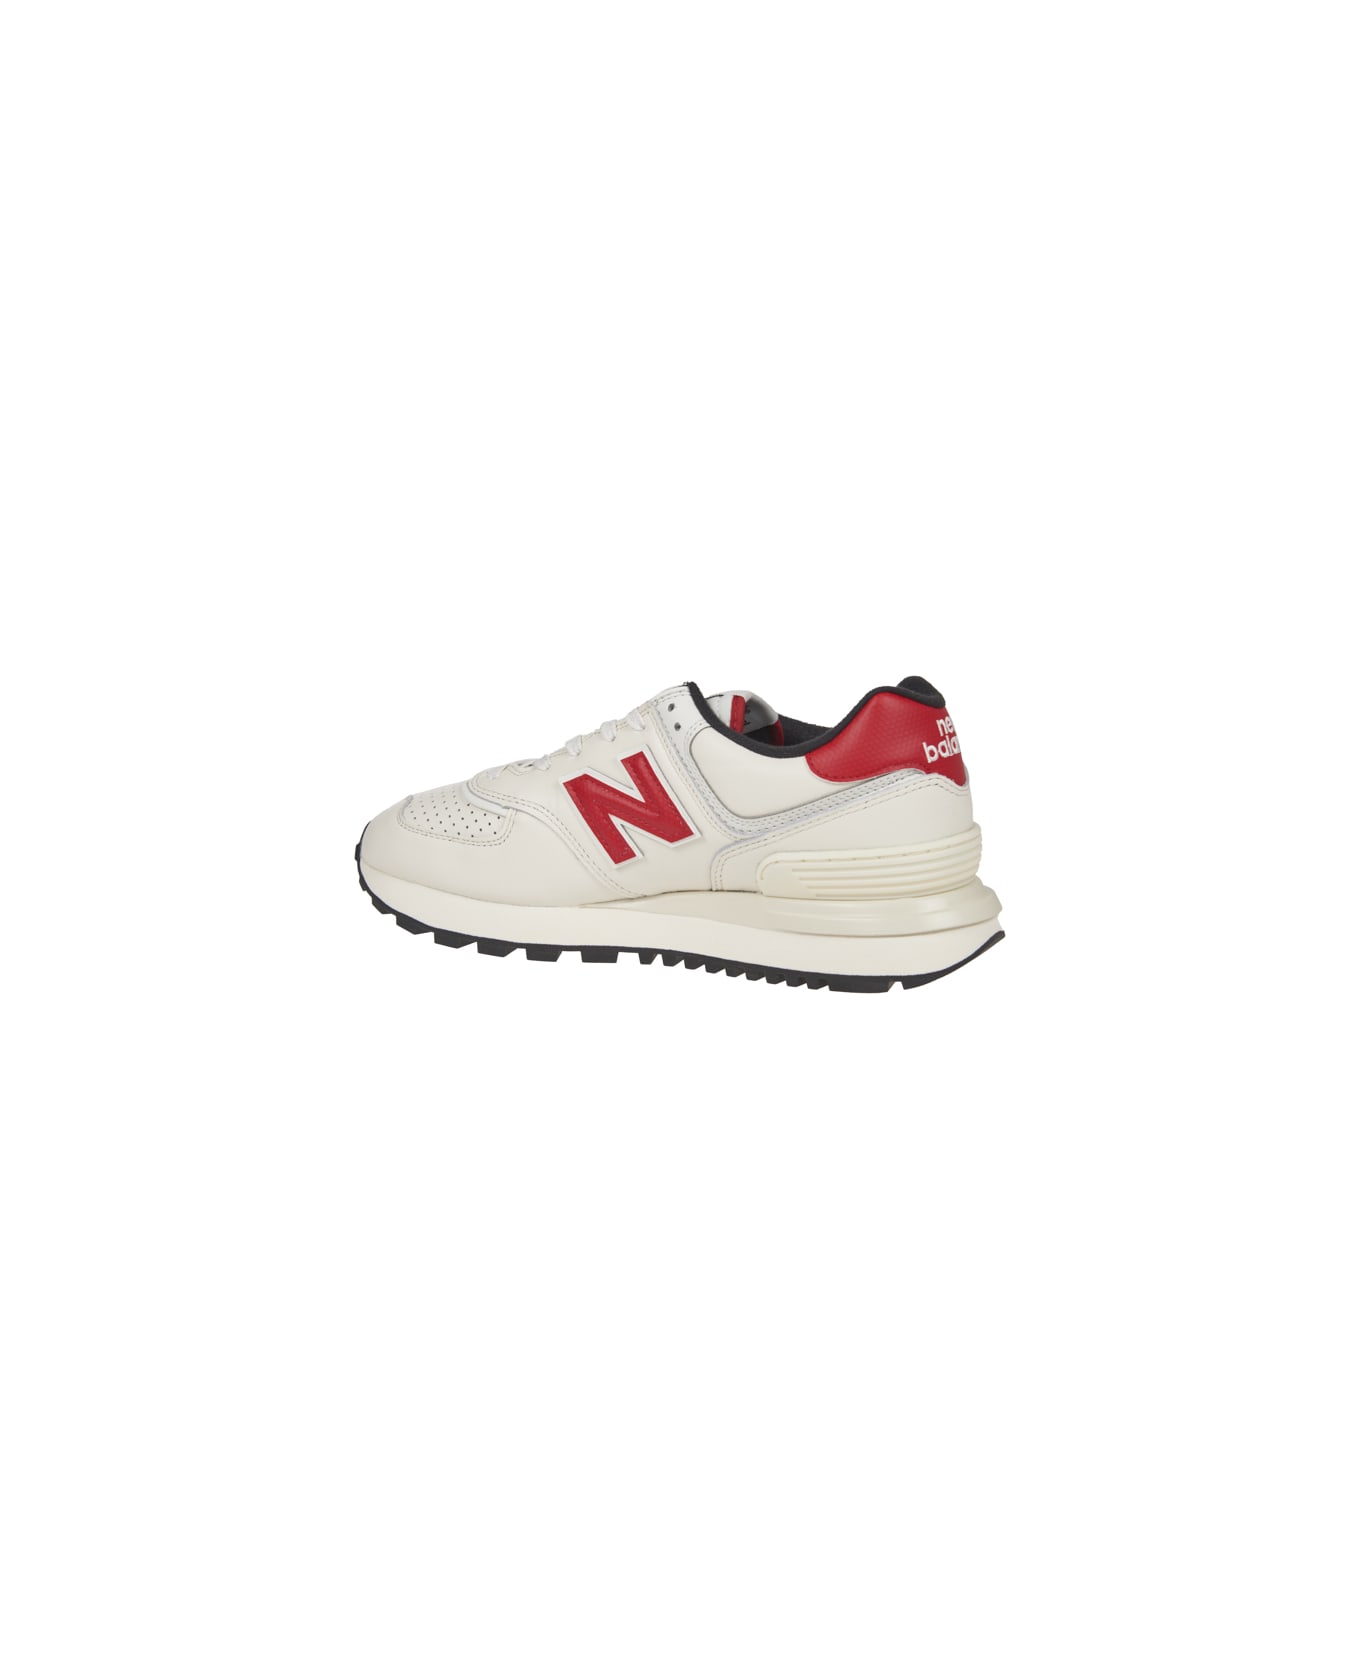 New Balance 574 Sneakers - White Red スニーカー